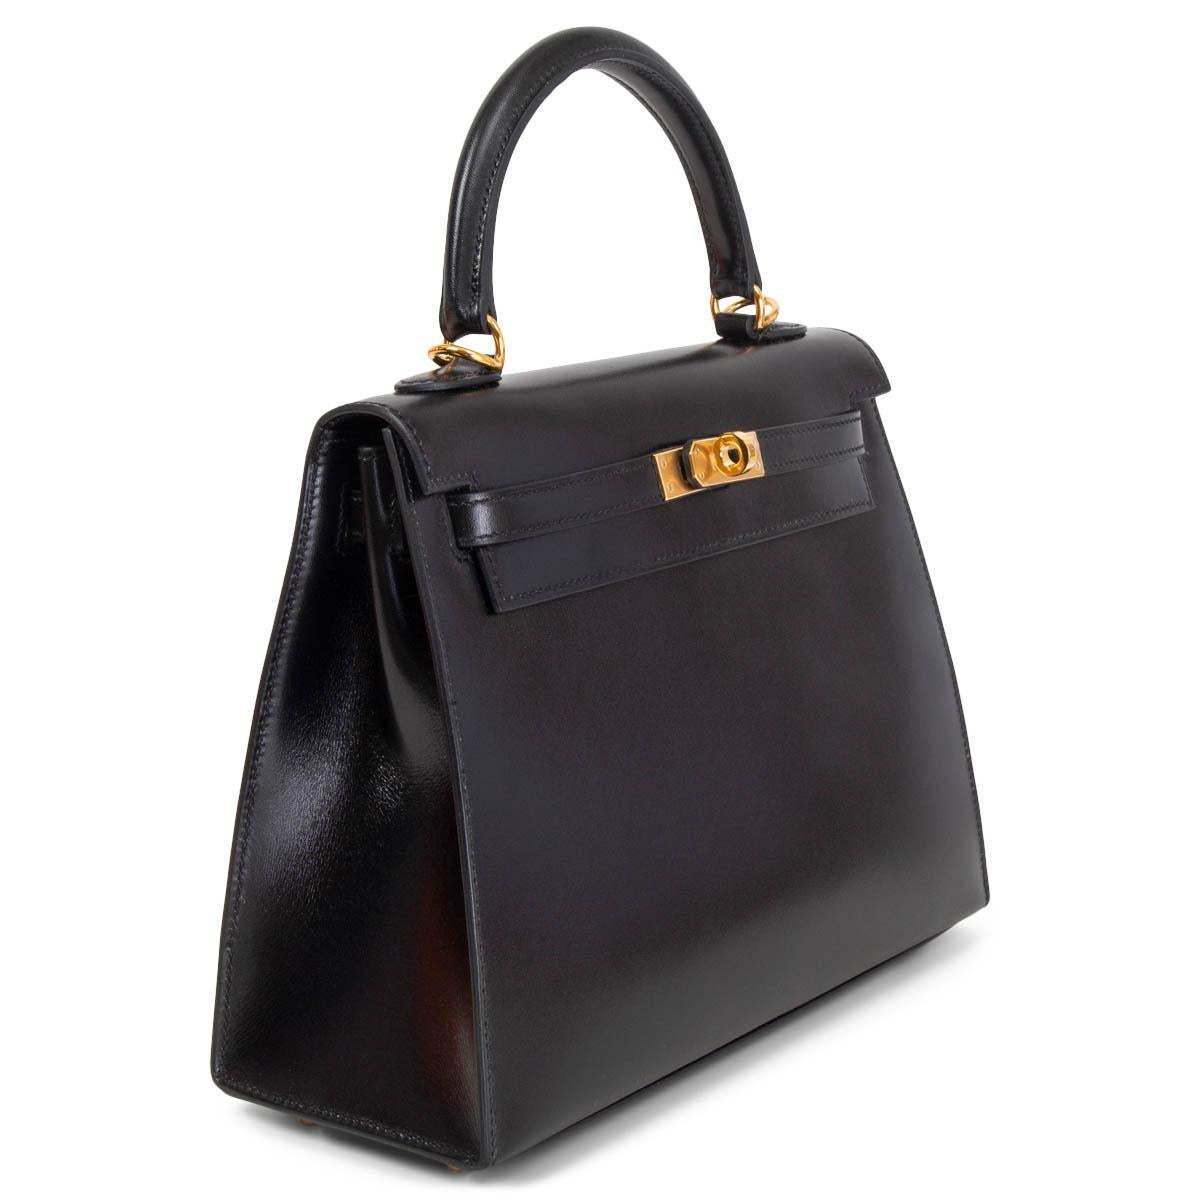 100% authentic Hermès Kelly 25 Sellier Bag in Noir (black) Veau Box leather featuring gold-tone hardware. Lined in Chevre (goat skin) with an open pocket against the front and a zipper pocket against the back. Brand new - Full Set. Comes with keys,